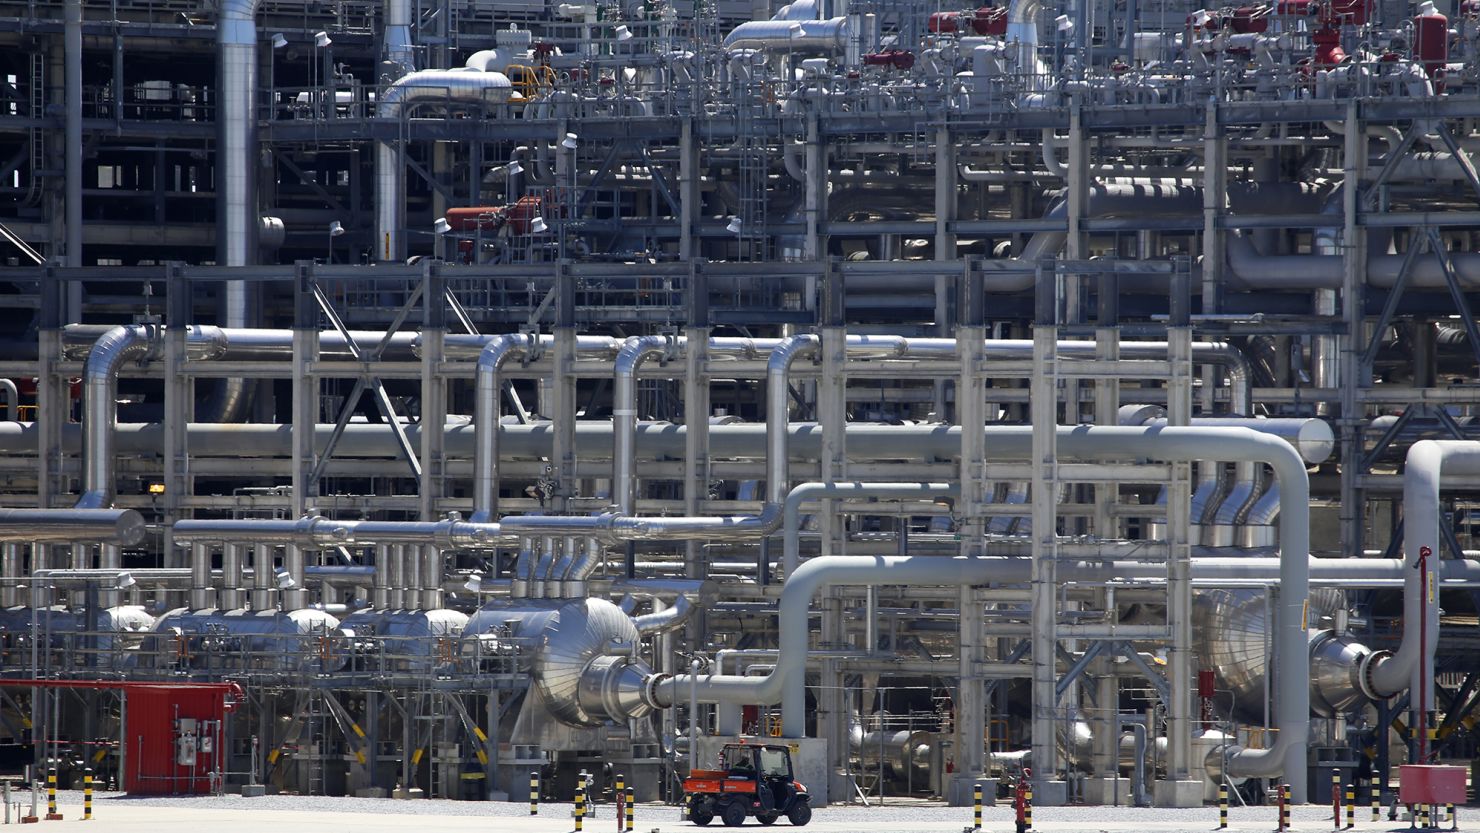 A small vehicle drives past a network of piping that makes up pieces of a "train" at Cameron LNG export facility in Hackberry, La., on Thursday, March 31, 2022. Natural gas is cooled at the facility and turned into liquid and sent on massive ships to many parts of the world. Once it arrives at its destination, the liquified natural gas is re-gasified and piped to homes, factories and other places. Demand for natural gas worldwide has been greater than ever since Russia, another major natural gas exporter, invaded Ukraine.